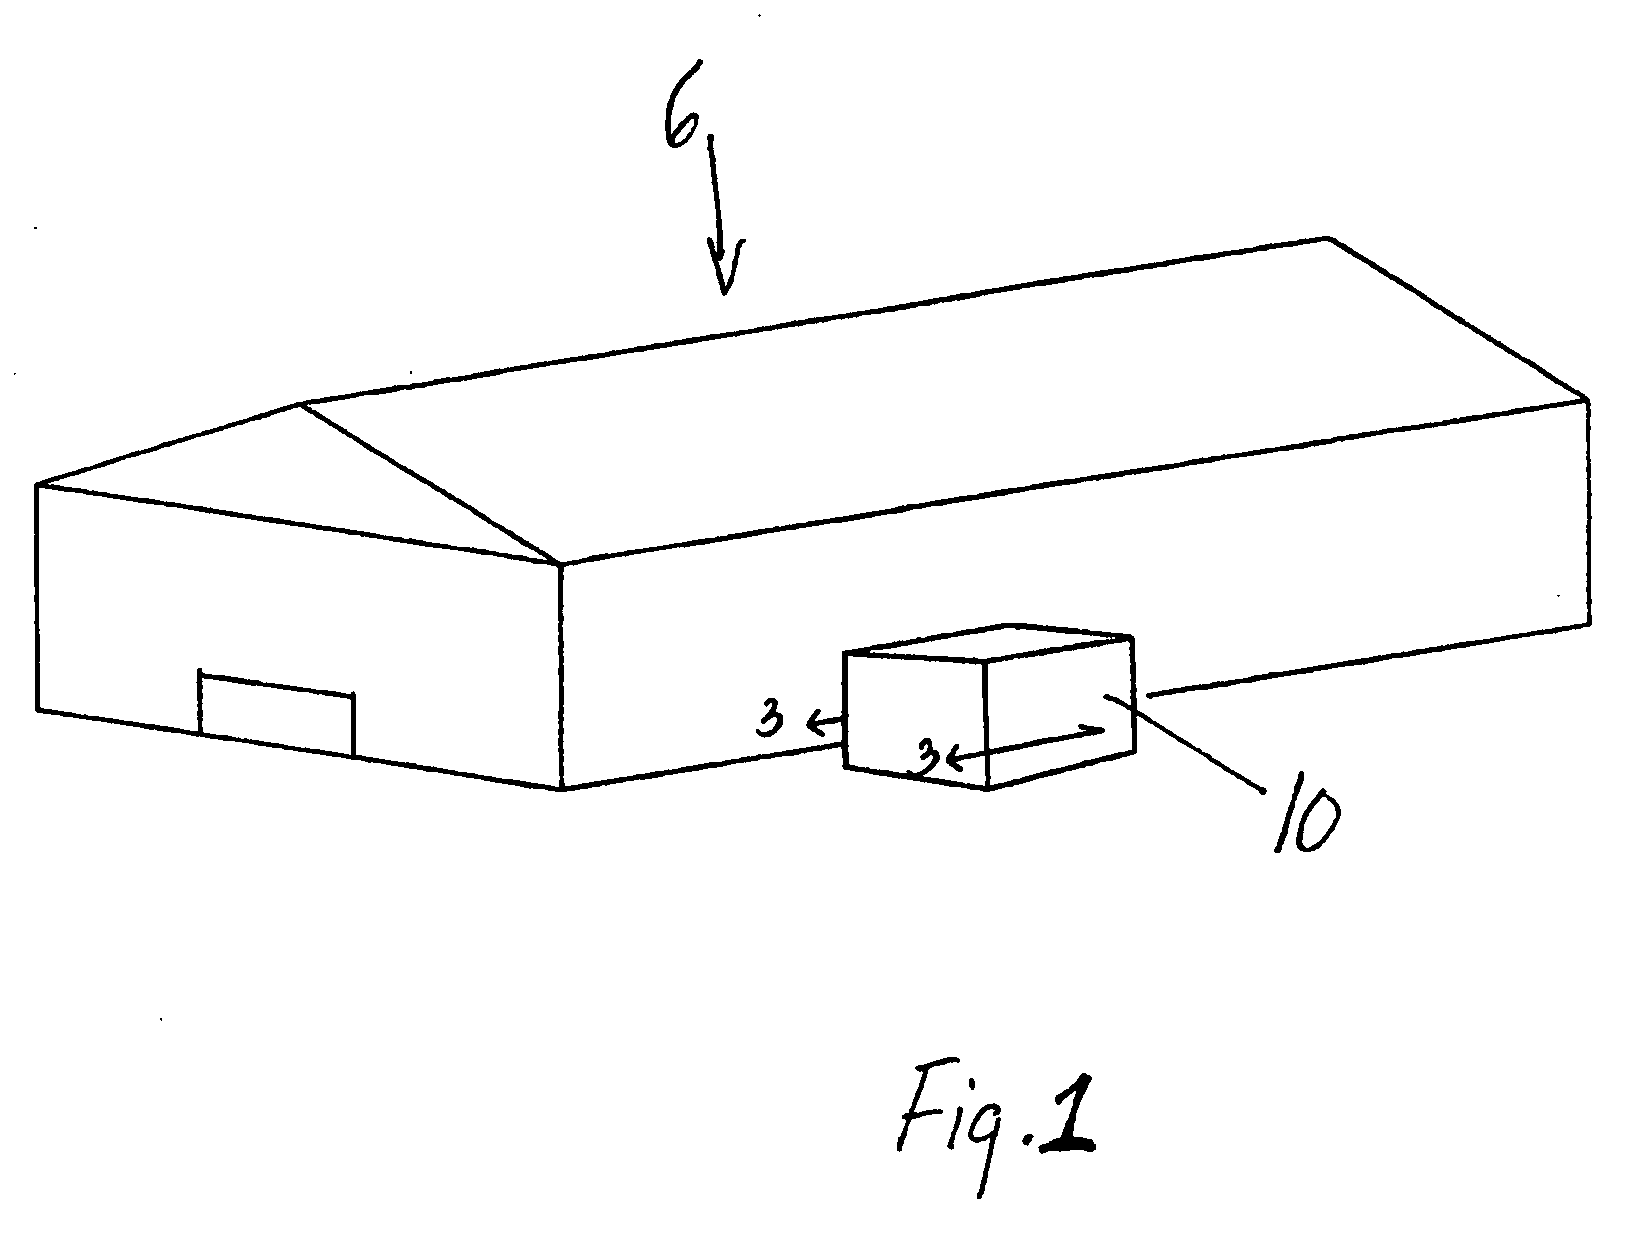 Air treatment device for agricultural buildings